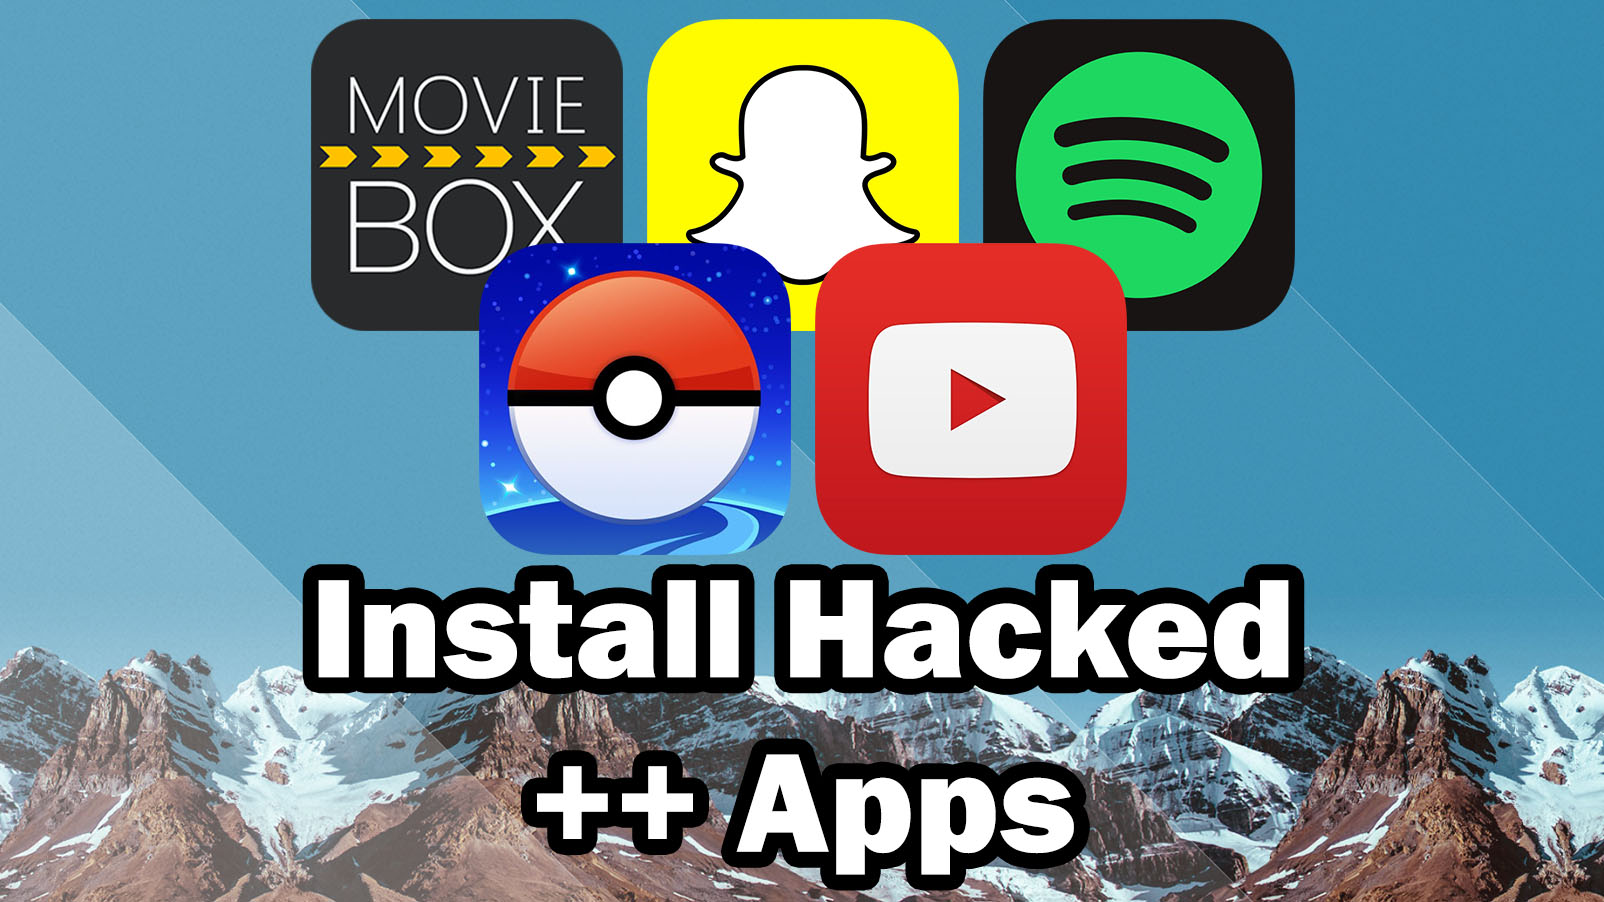 How to Install Hacked ++ Apps & Hacked Games on iOS 11 / iOS 10.0 10.